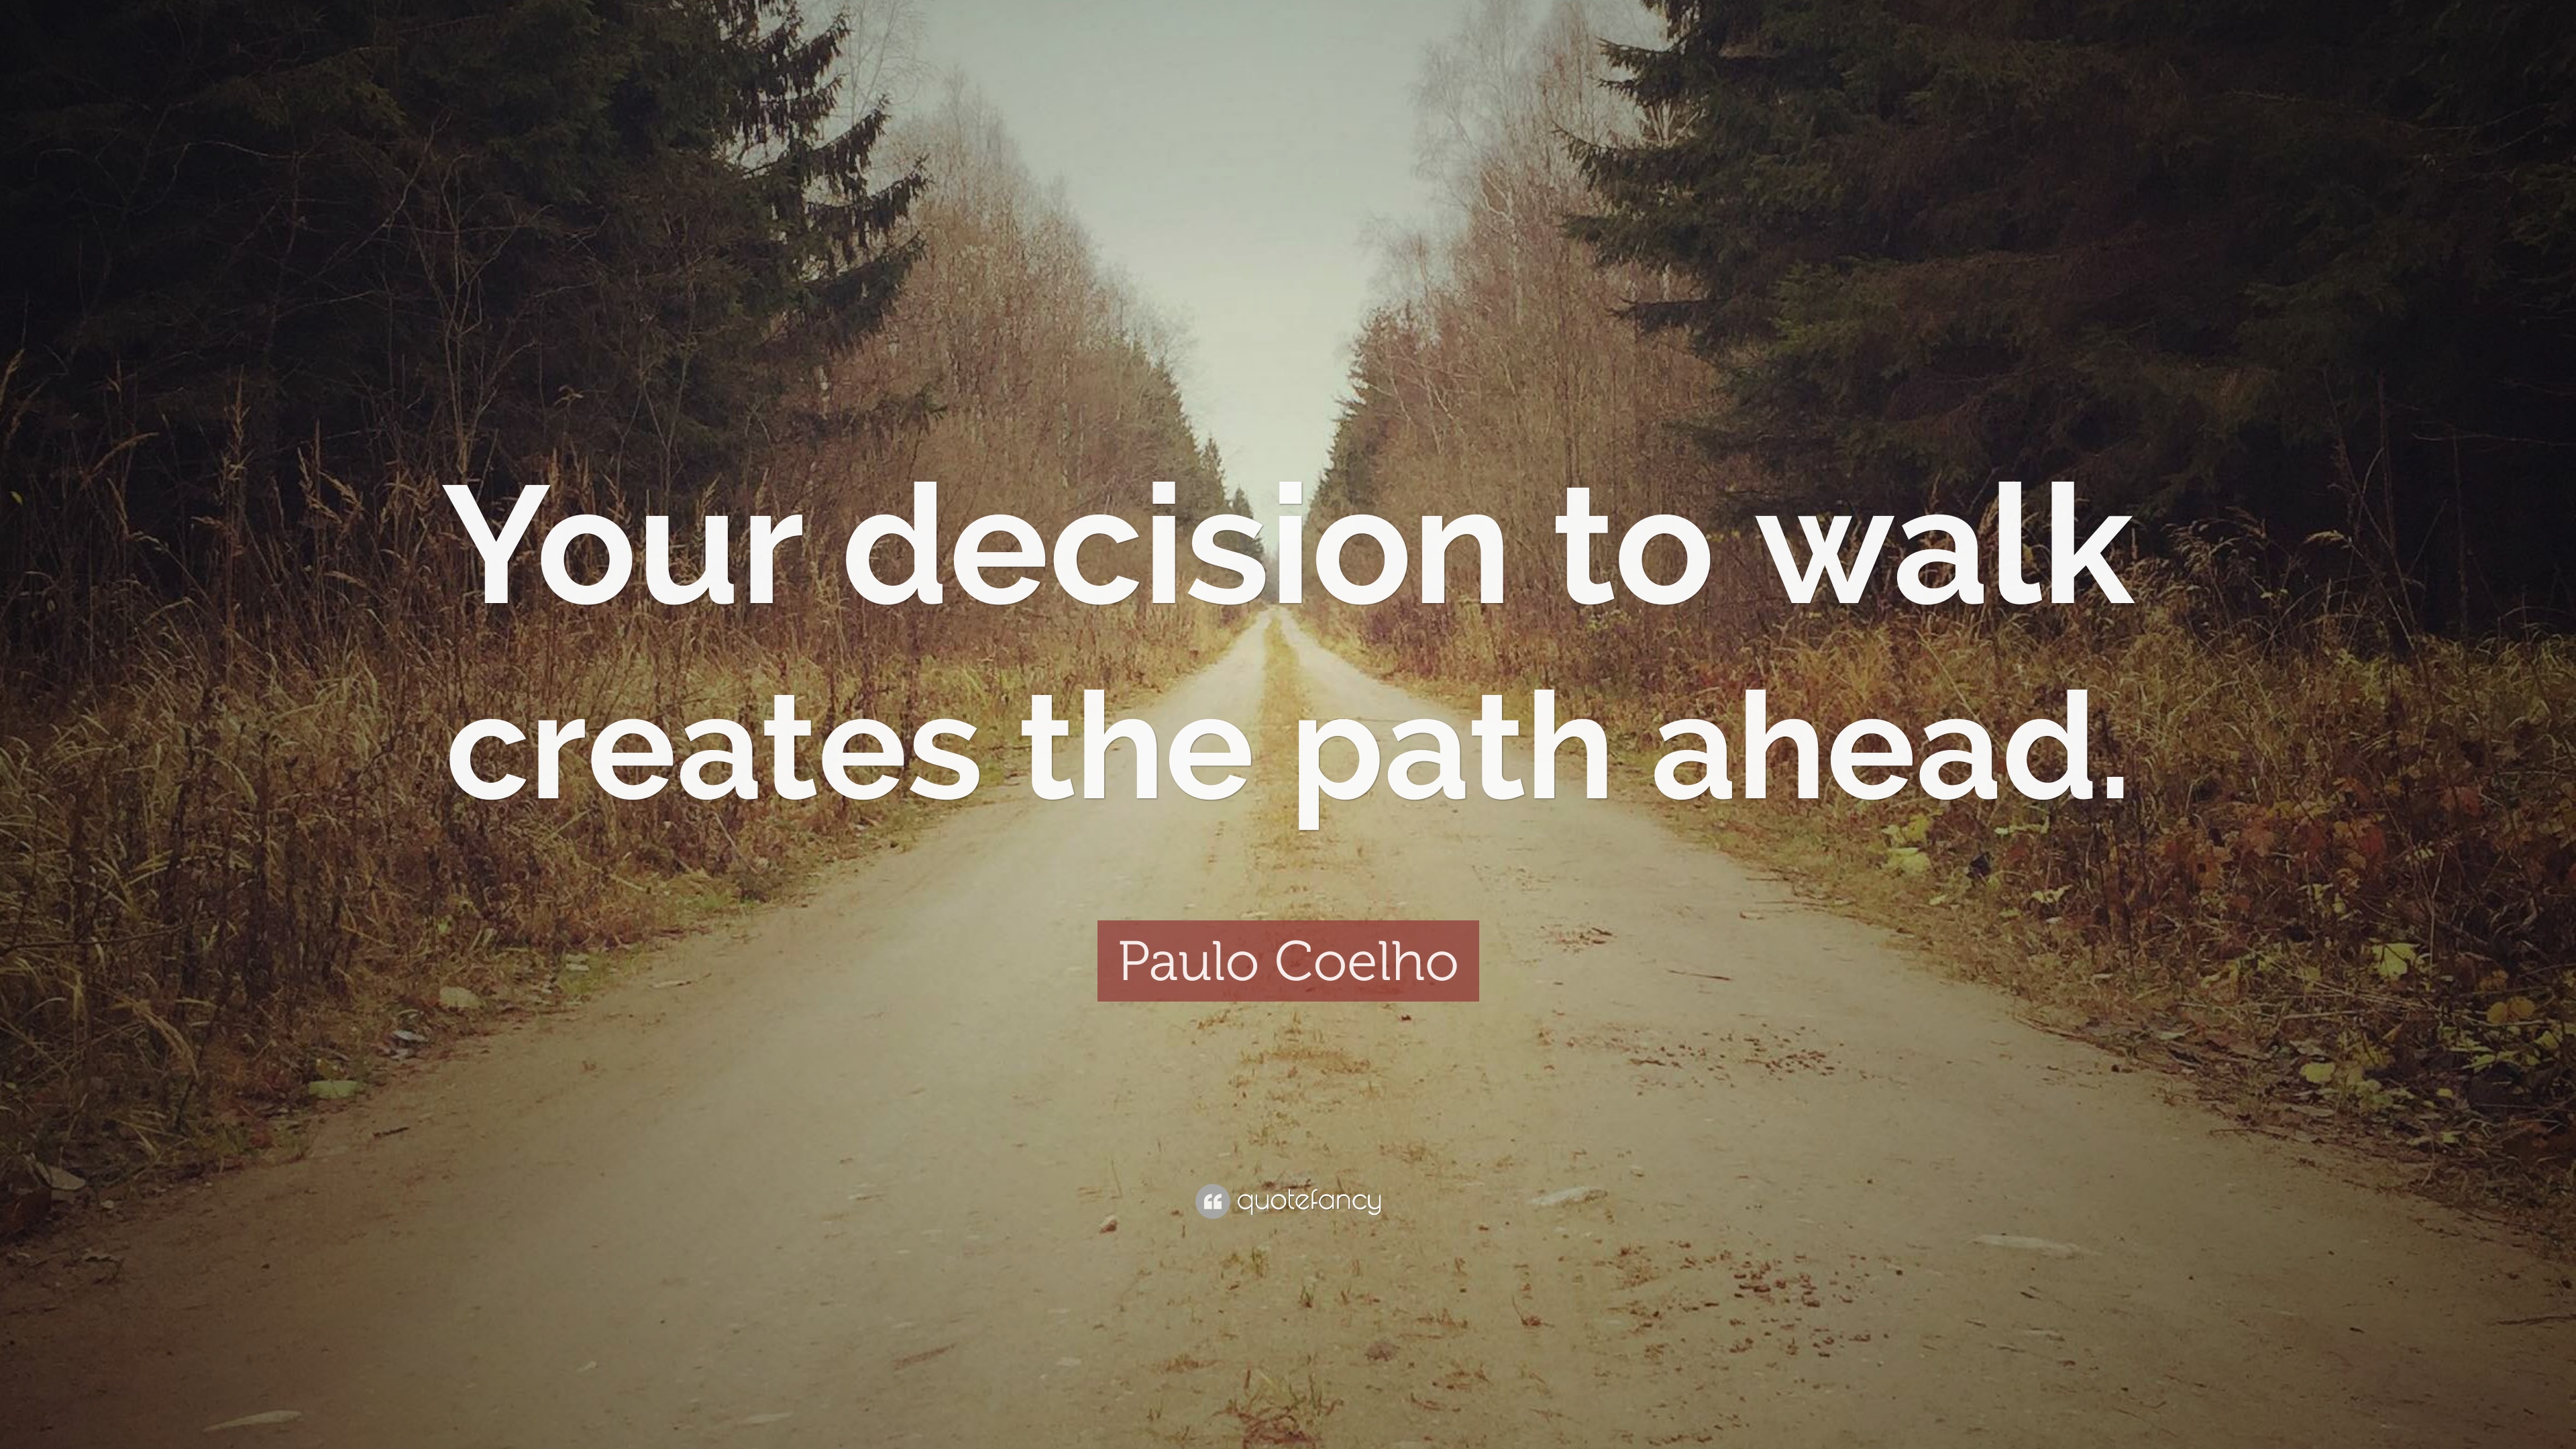 Paulo Coelho Quote: “Your decision to walk creates the path ahead ...